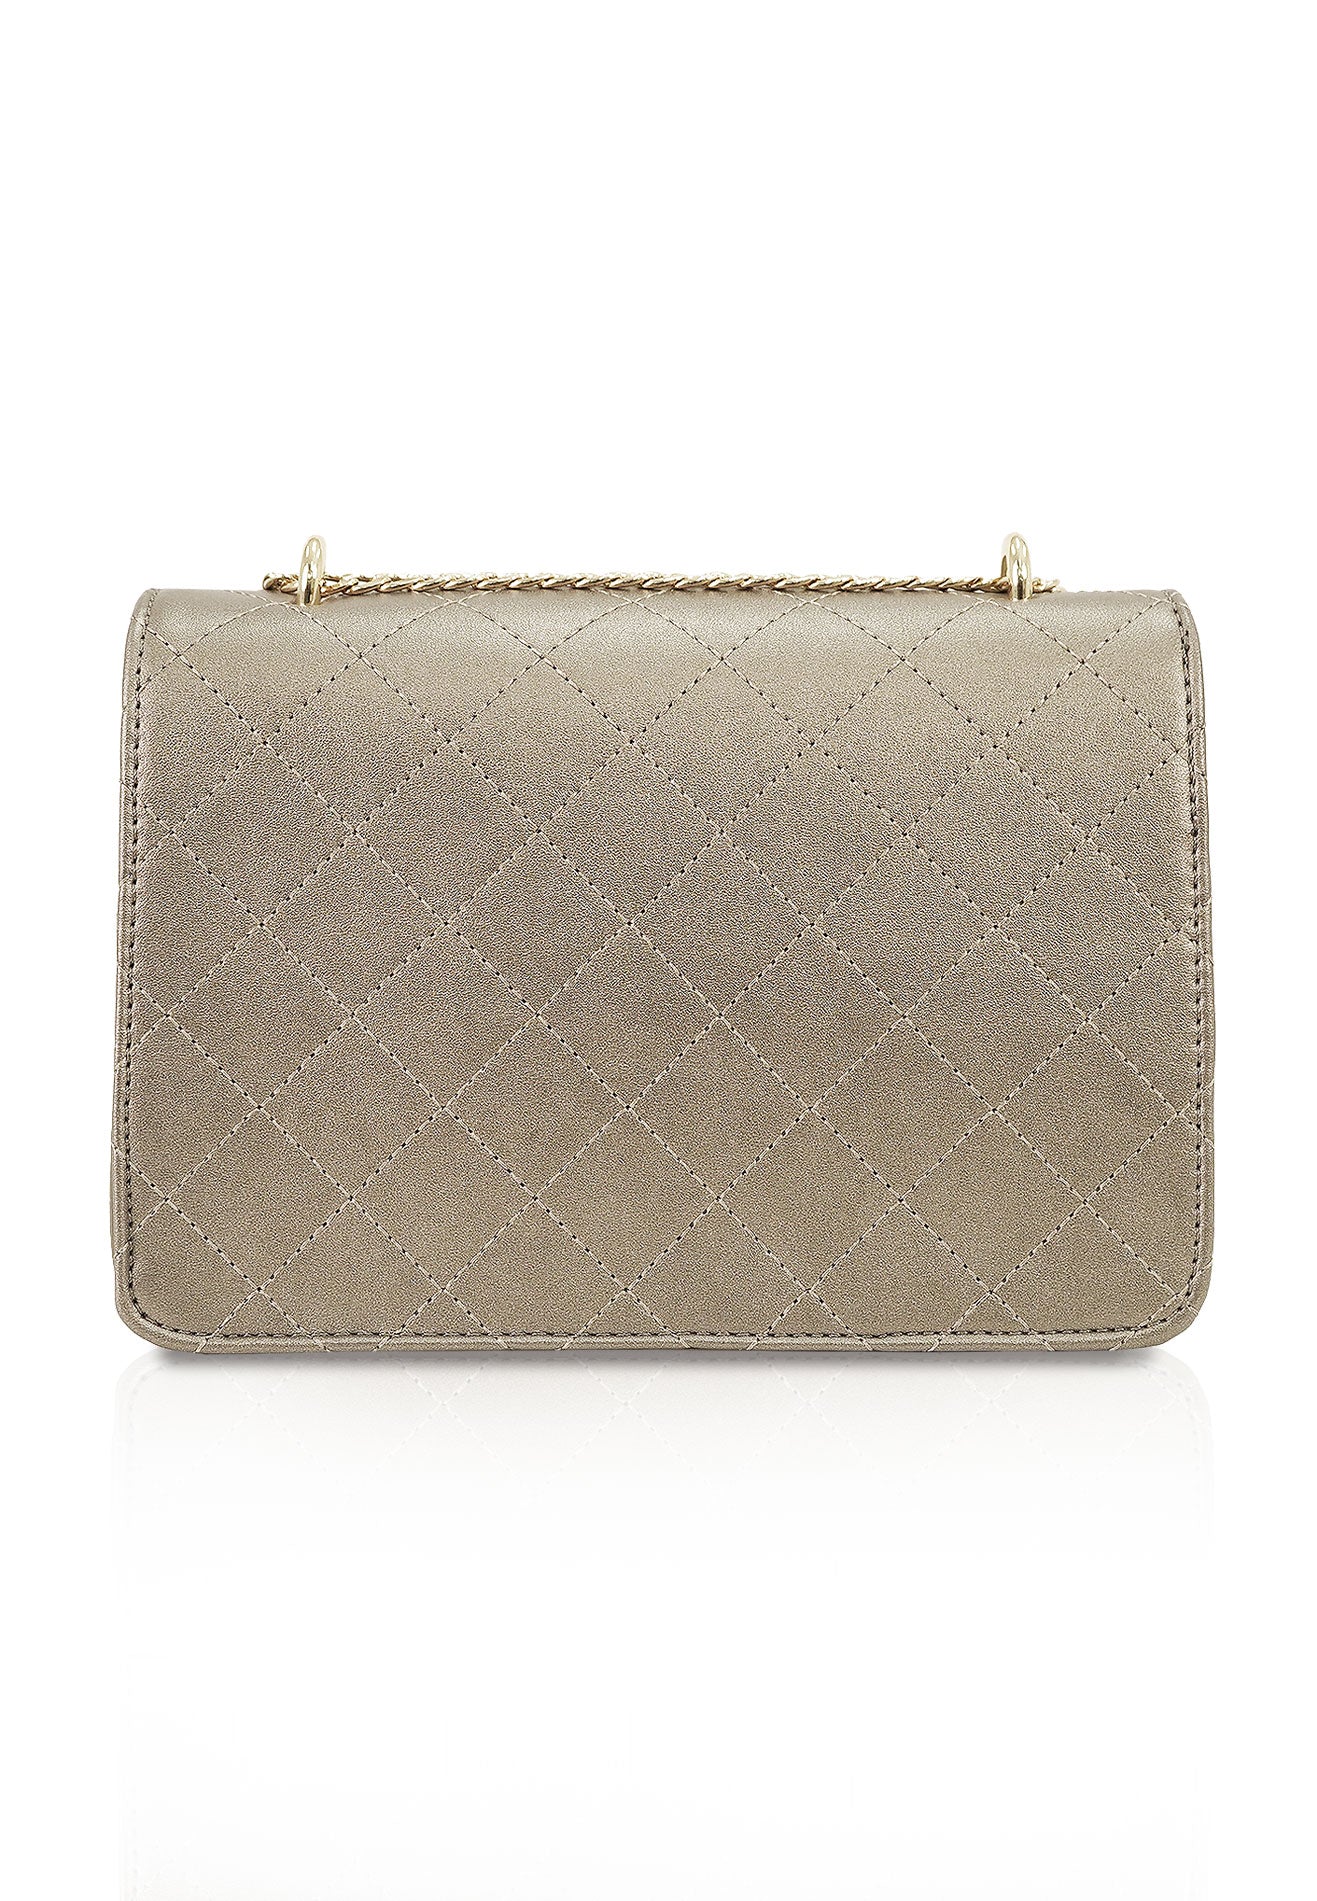 VOIR Small Crossbody Quilted Front Flap Bag